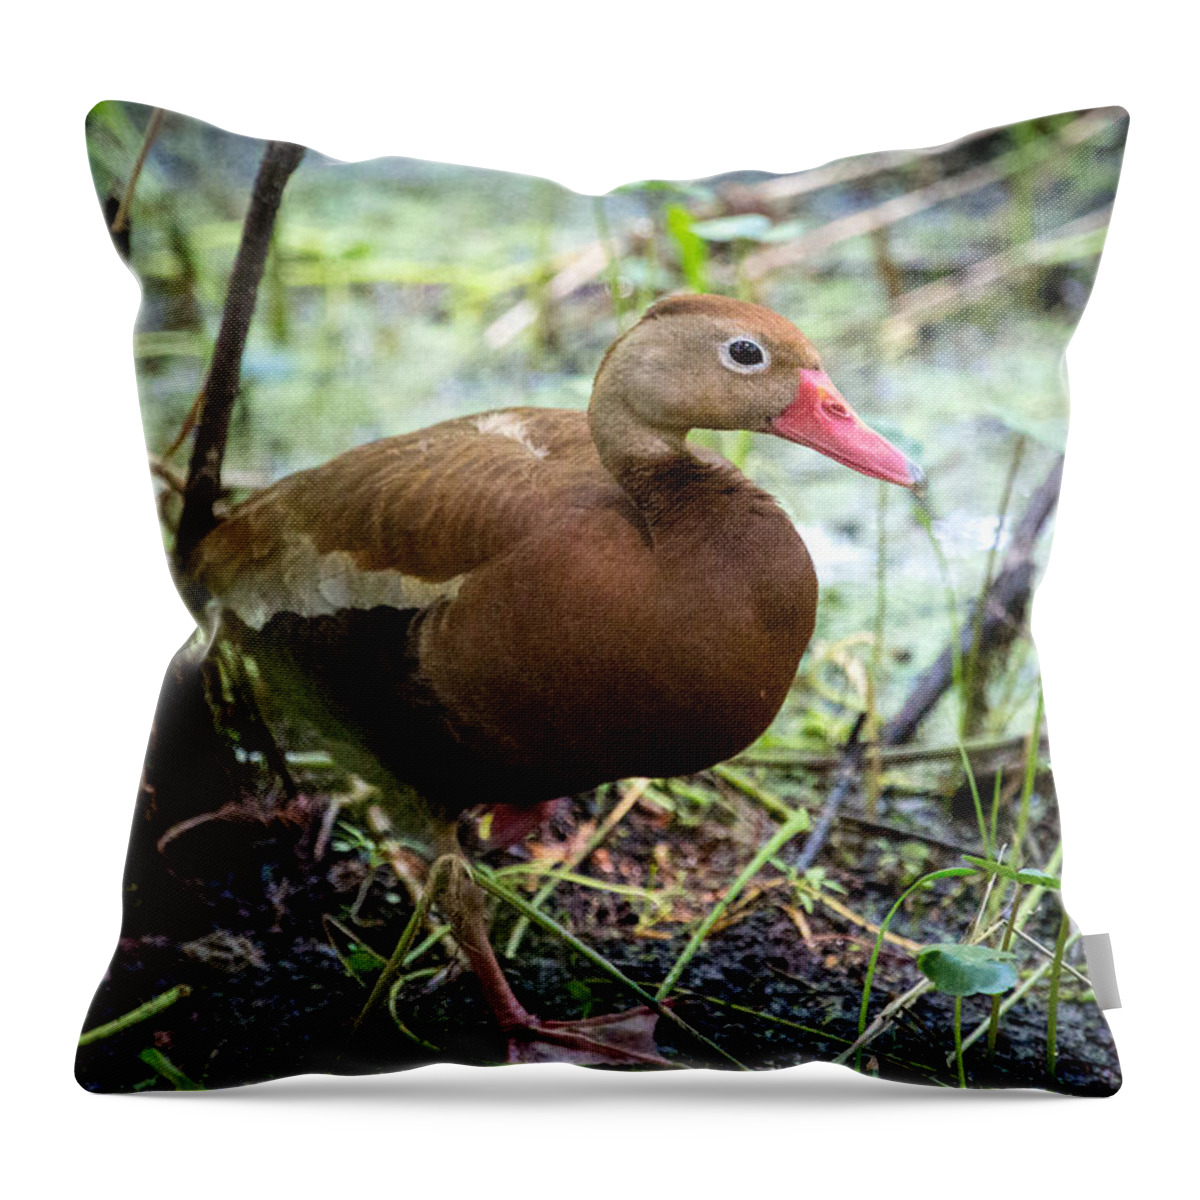 Black-bellied Whistling Duck Throw Pillow featuring the photograph Black-bellied Whistling Duck 2 by Gregory Daley MPSA